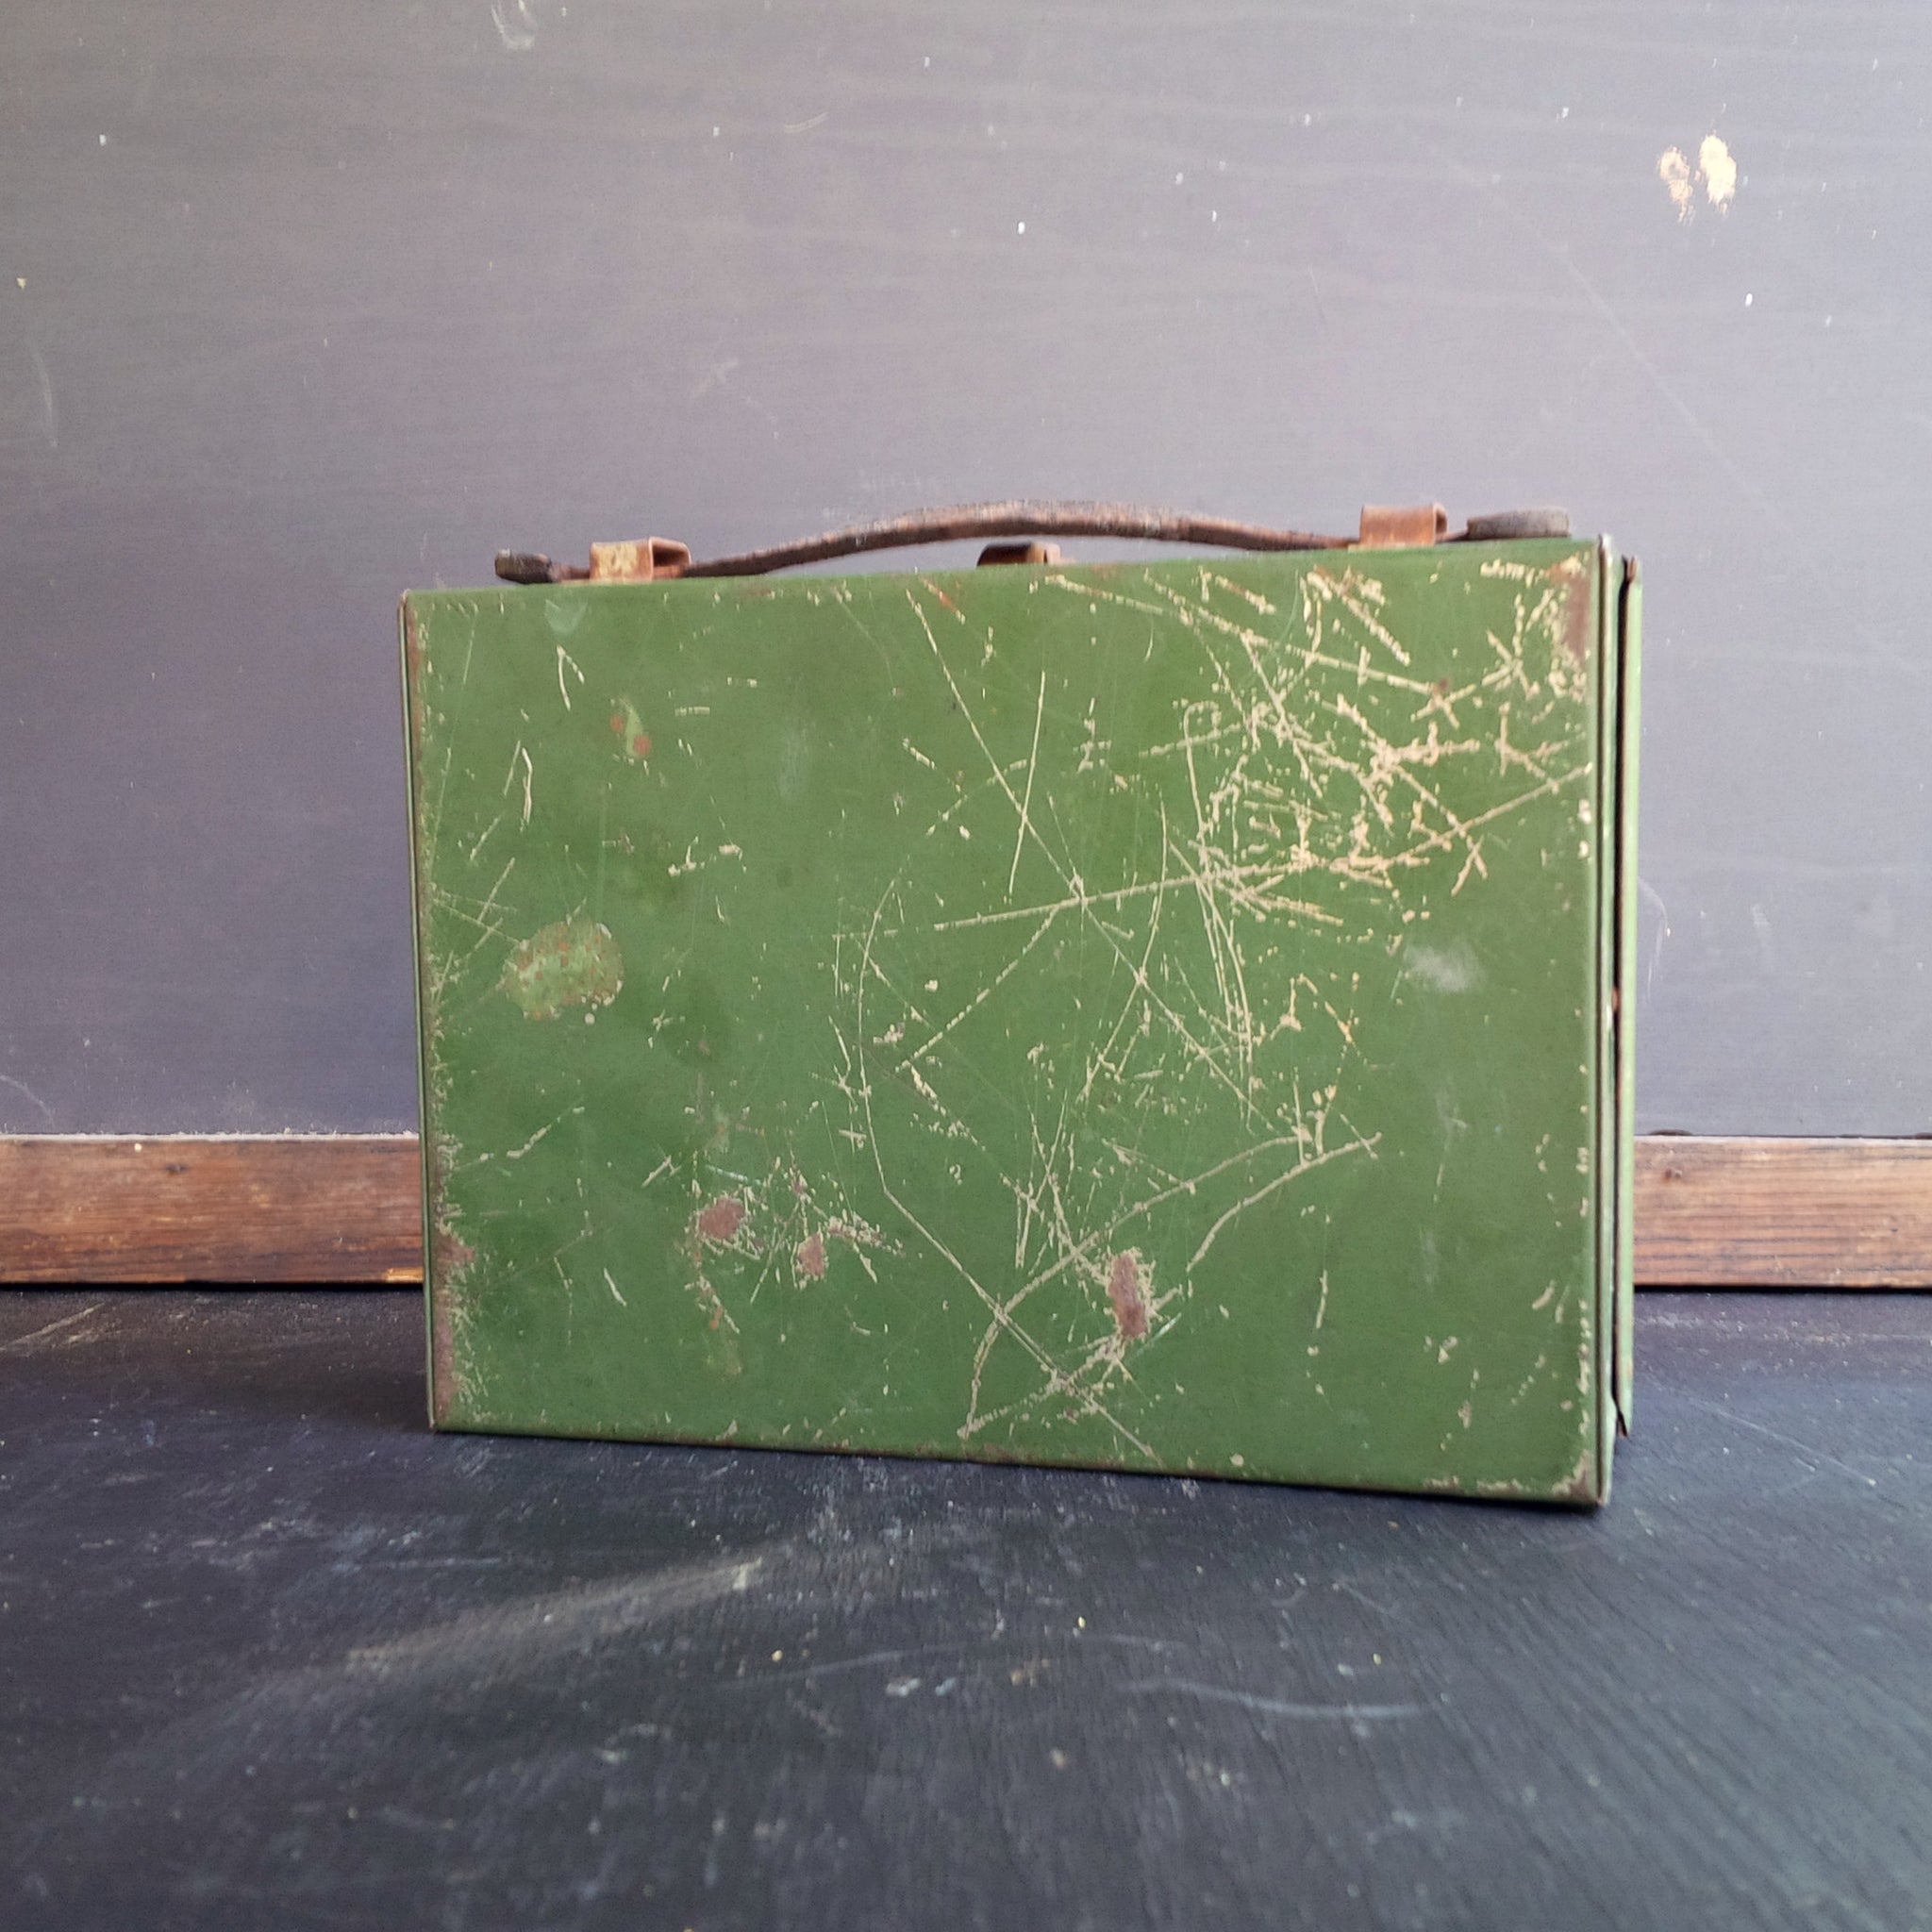 Vintage Metal Lunch Box - 1920's Sectioned Box - Chippy Green and Gold with Leather Handle